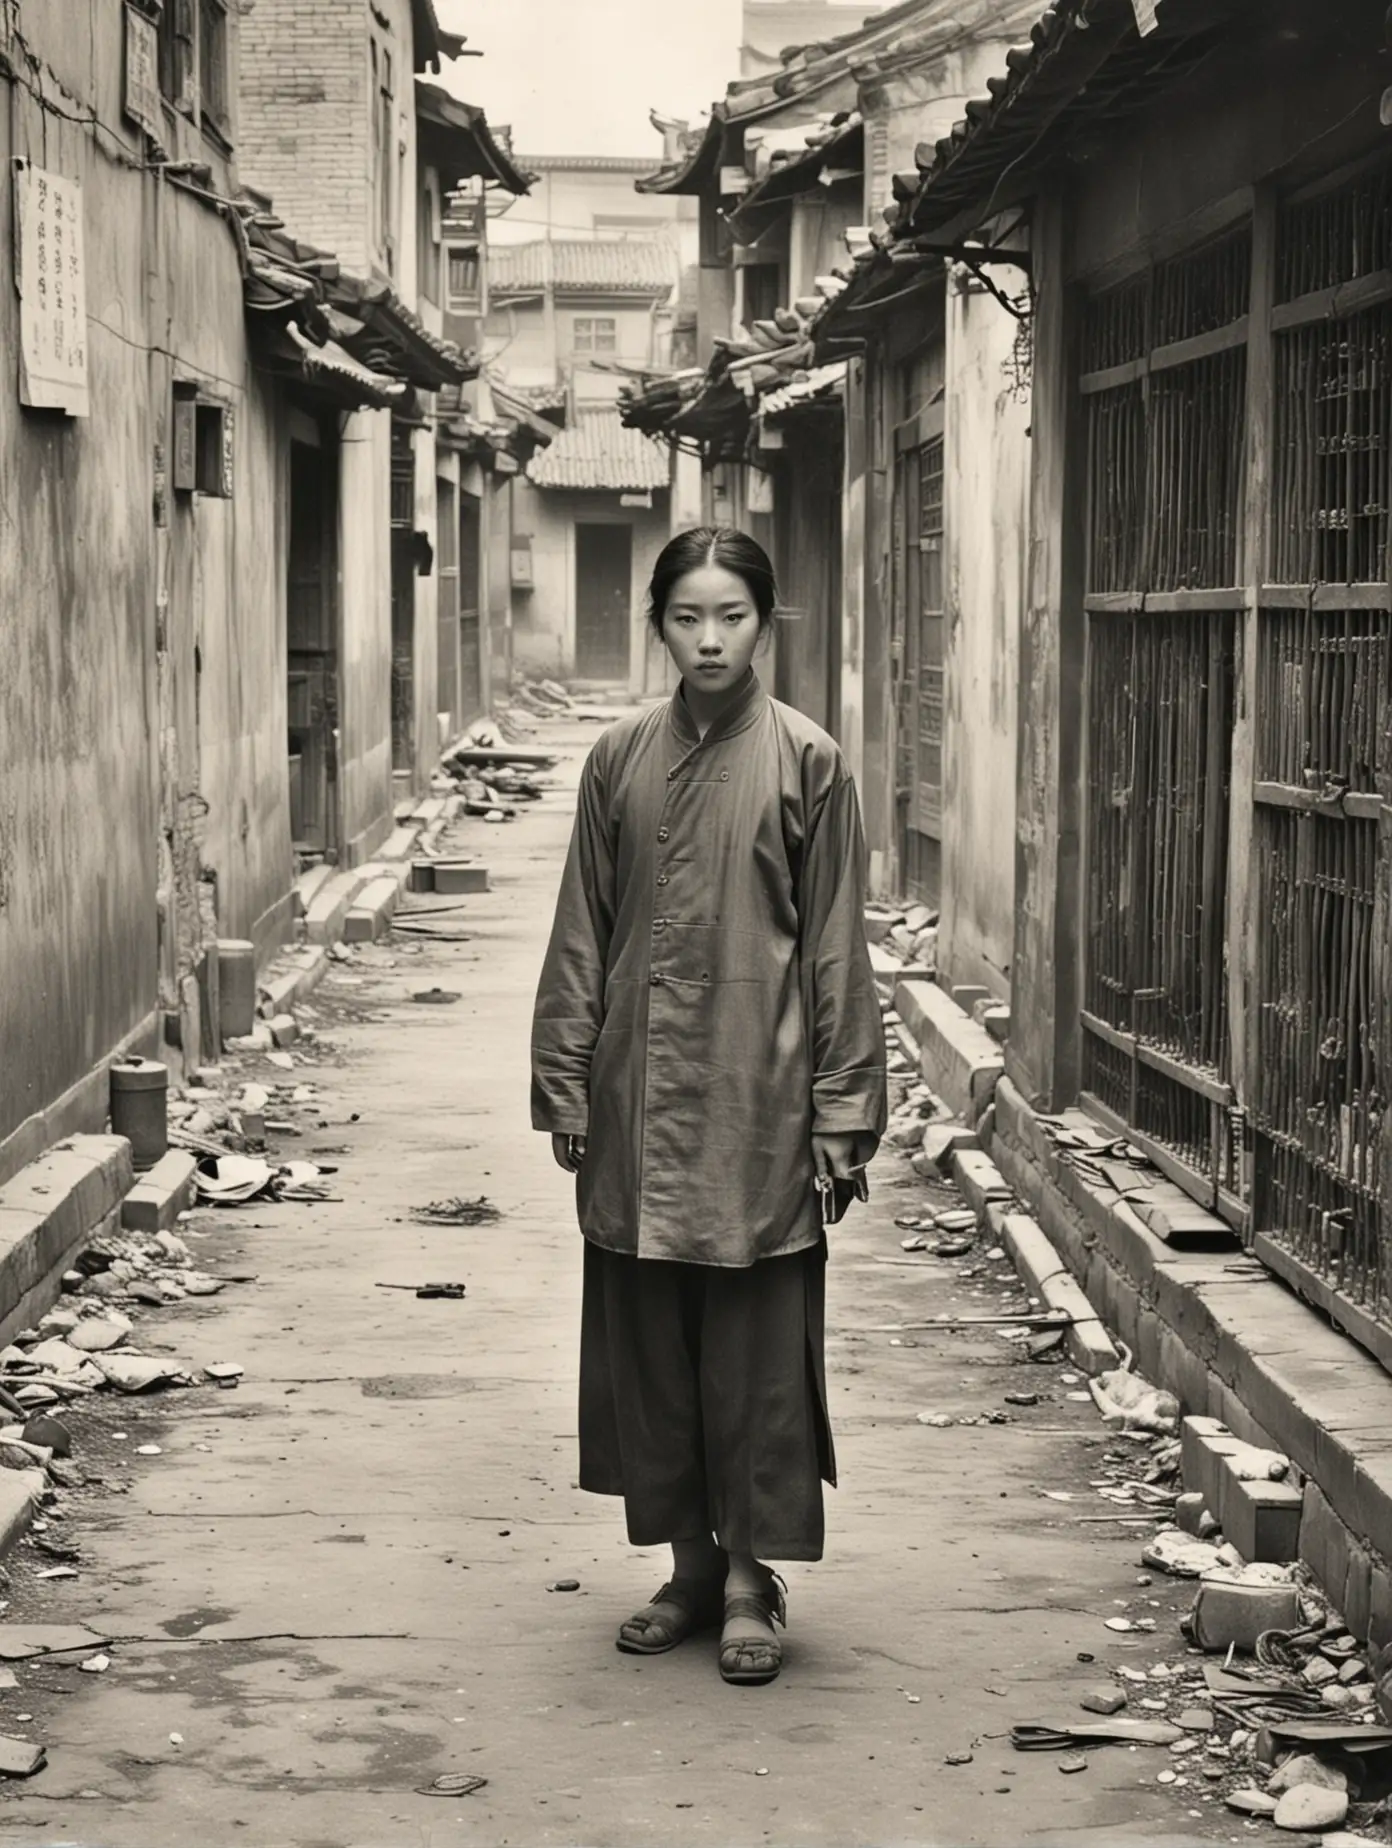 An old photo from the Qing Dynasty, with 17-year-old Lin Qingxia on the dilapidated street.